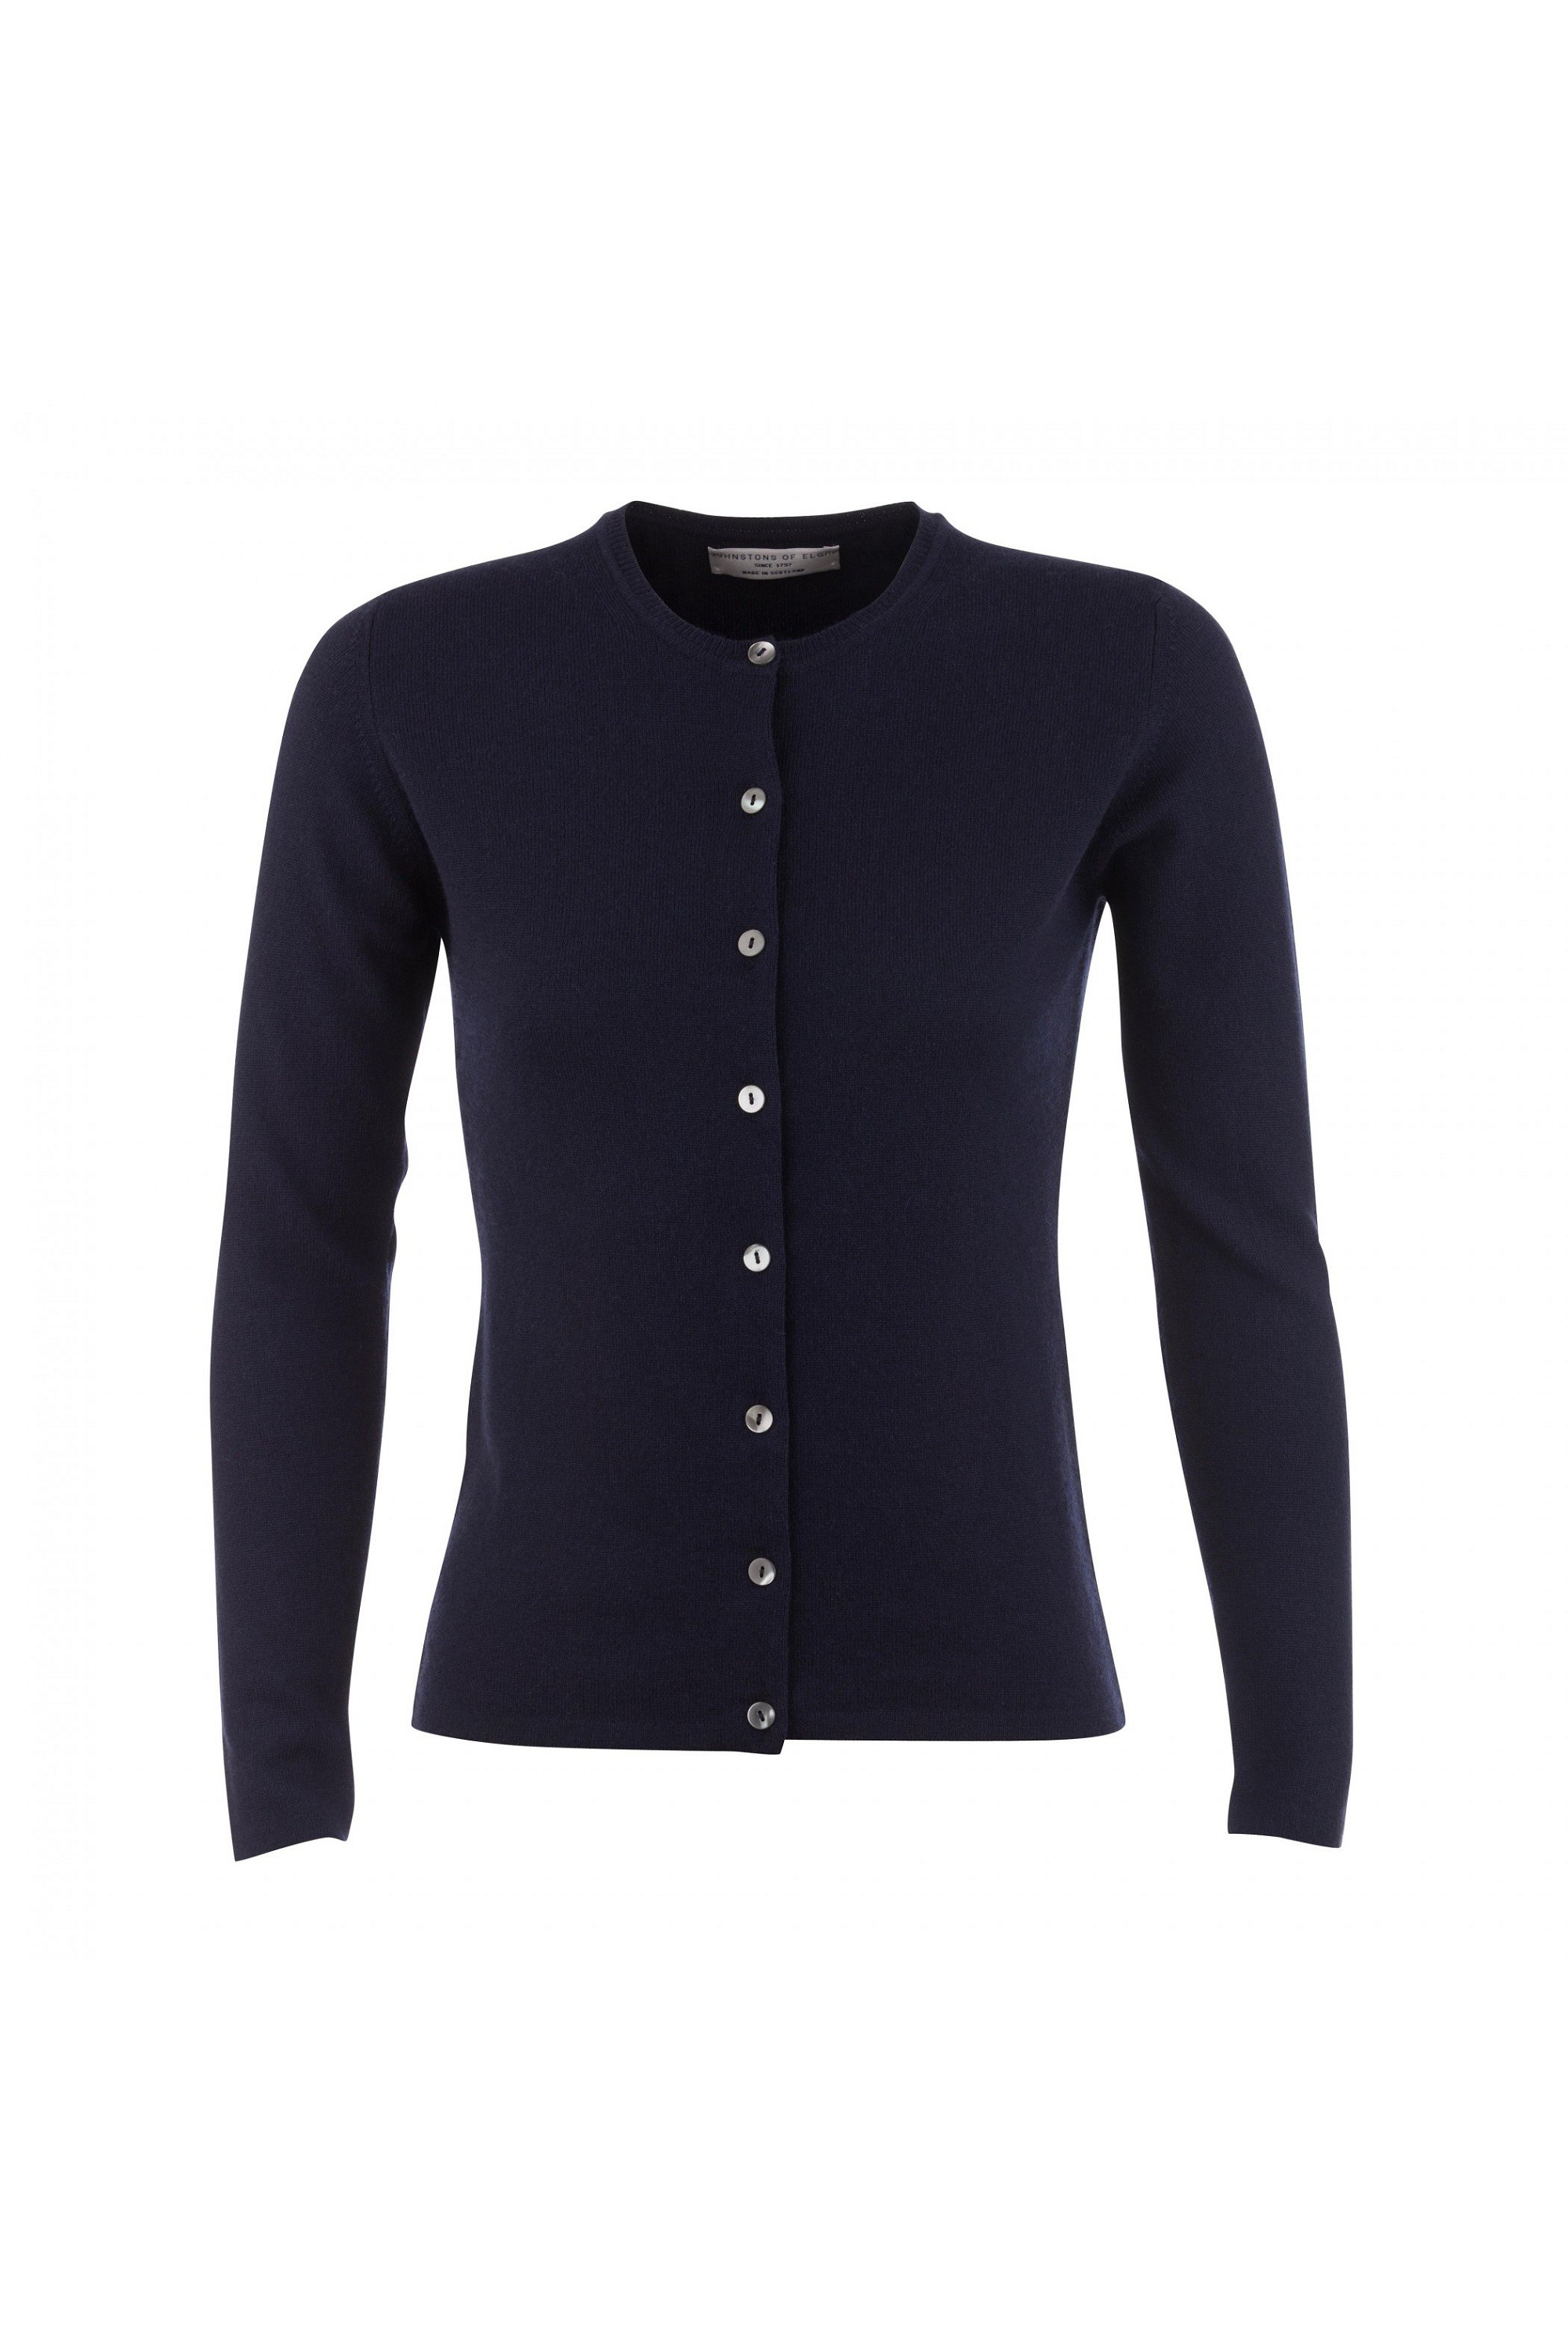 Cashmere Classic High Button Cardigan - Navy